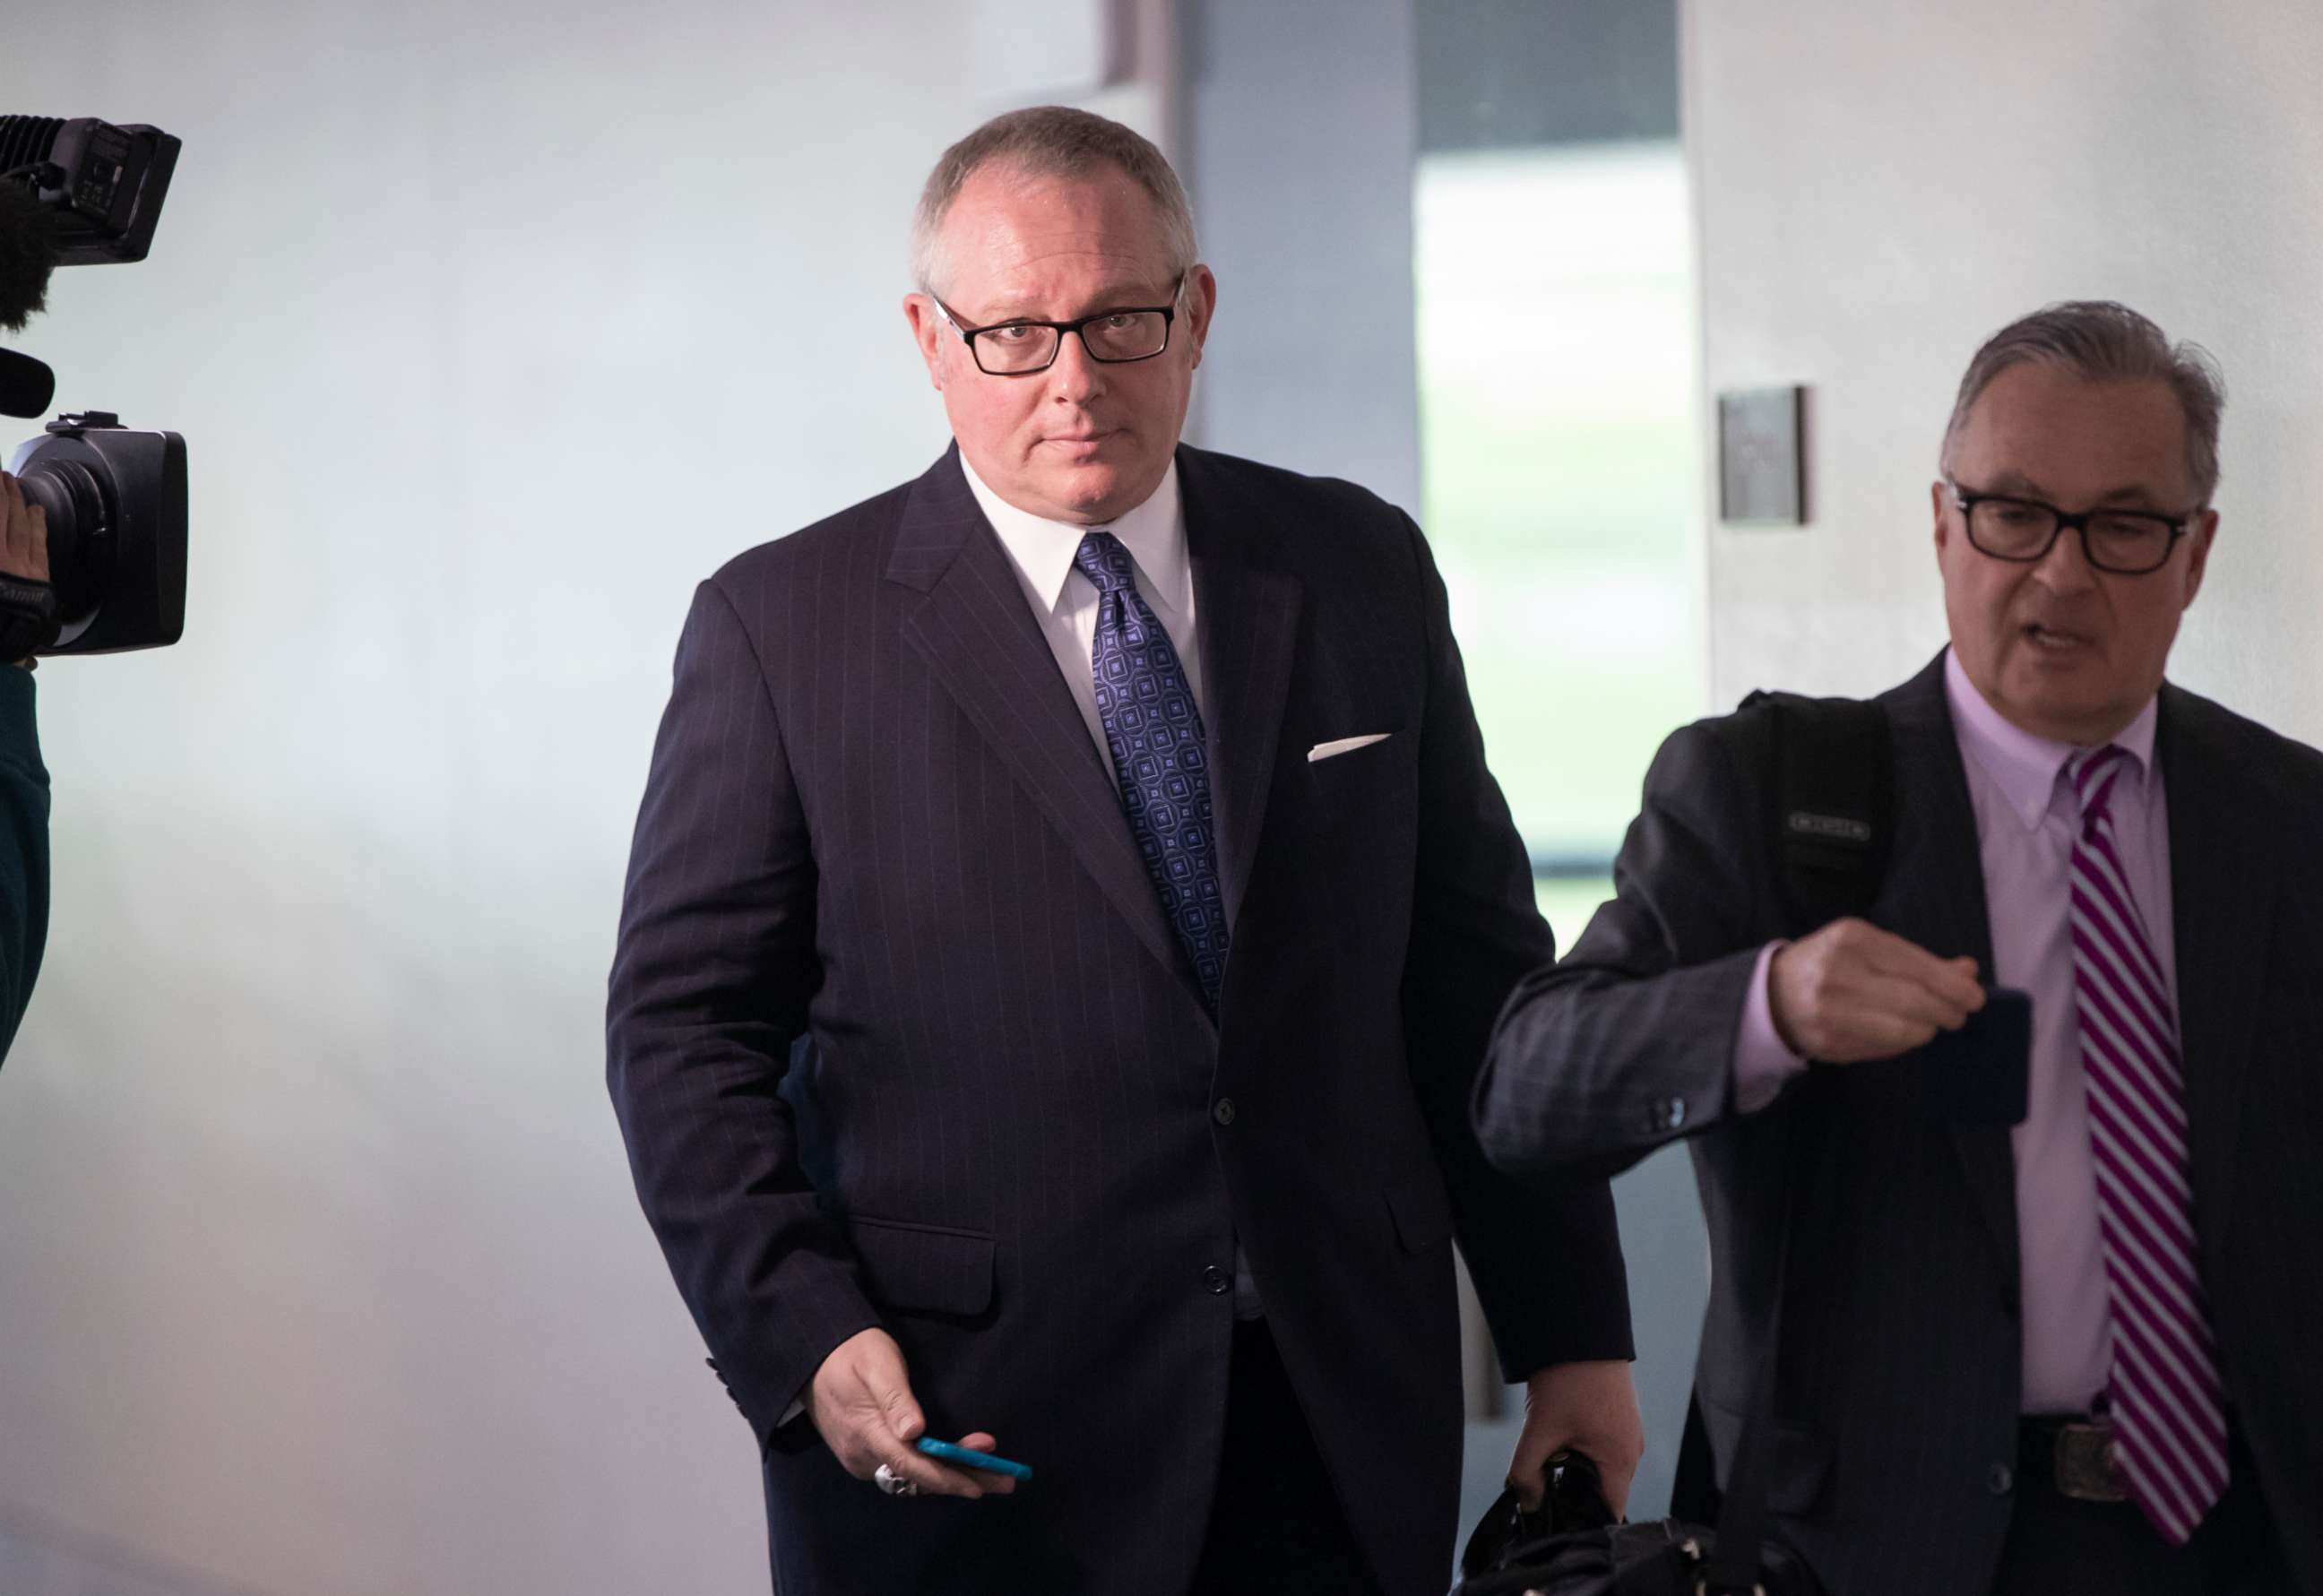 PHOTO: Former Donald Trump campaign official Michael Caputo, left, joined by his attorney Dennis C. Vacco, leaves after being interviewed by Senate Intelligence Committee staff on Capitol Hill in Washington, May 1, 2018.